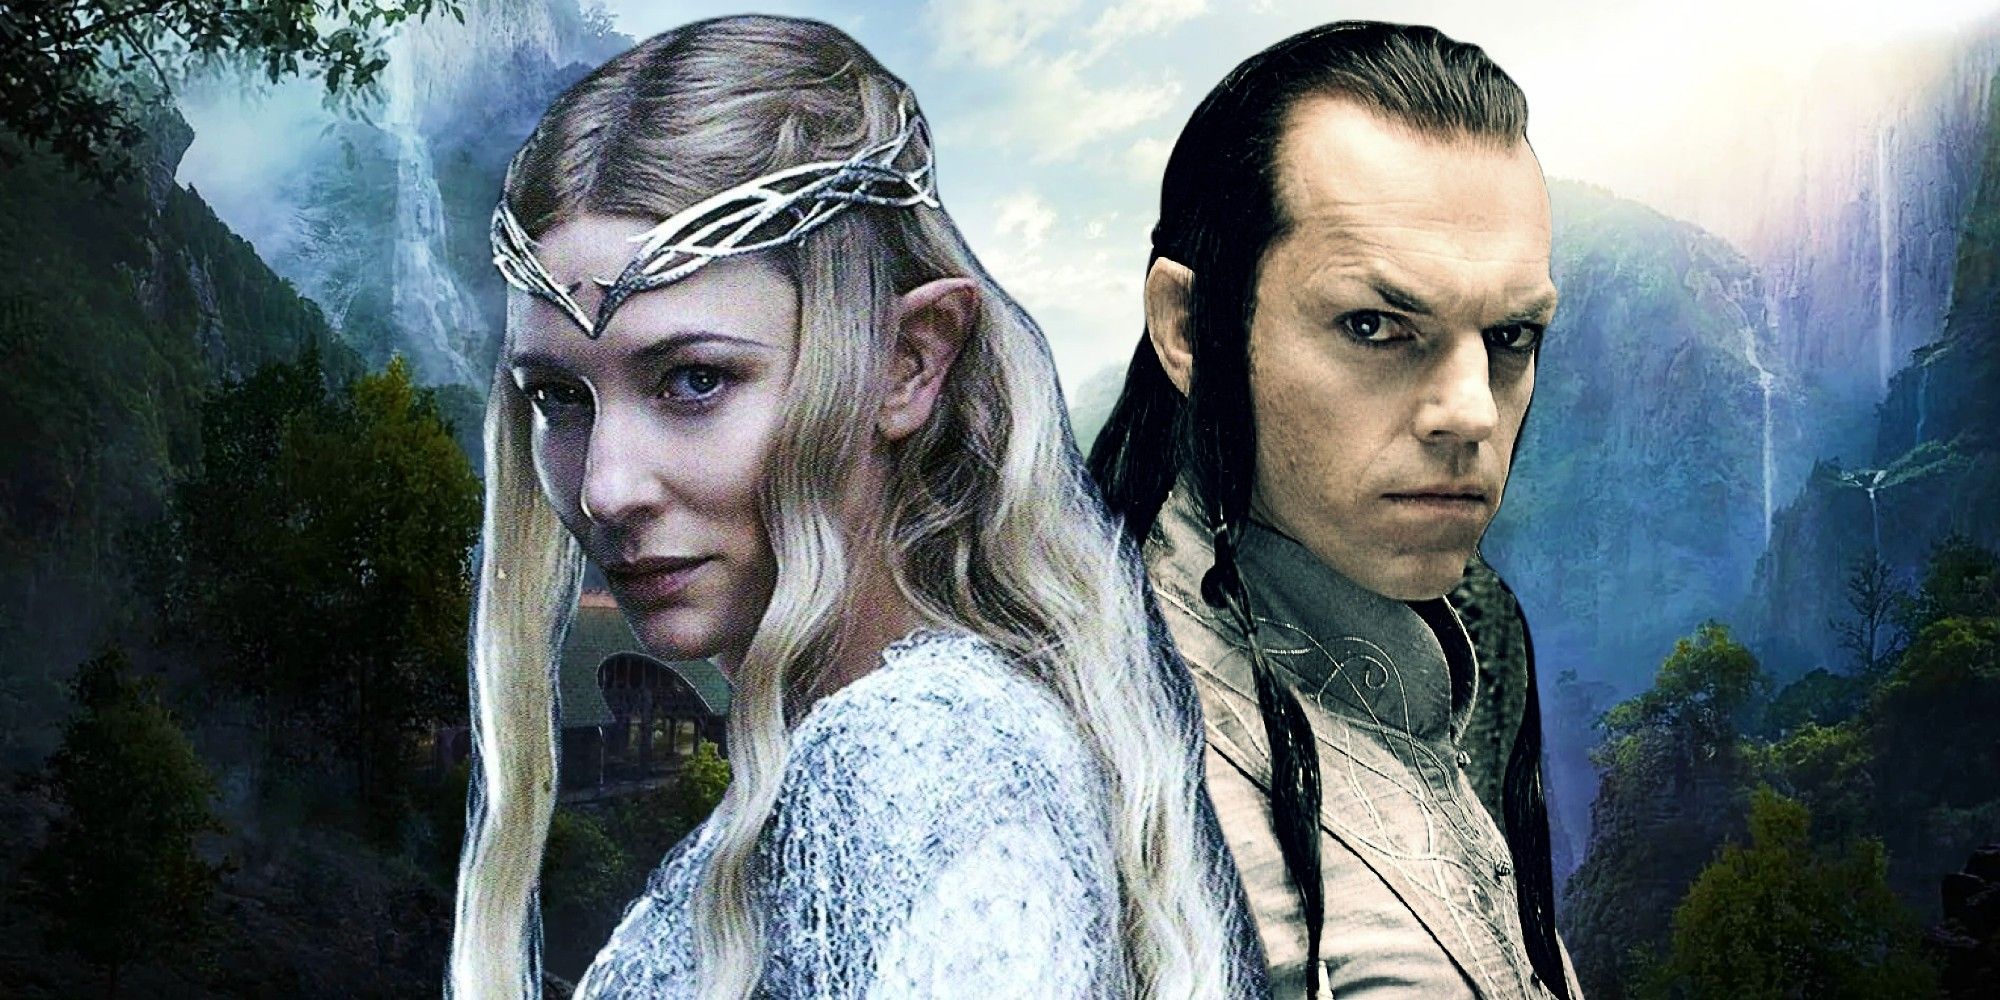 A man for being Lord Elrond